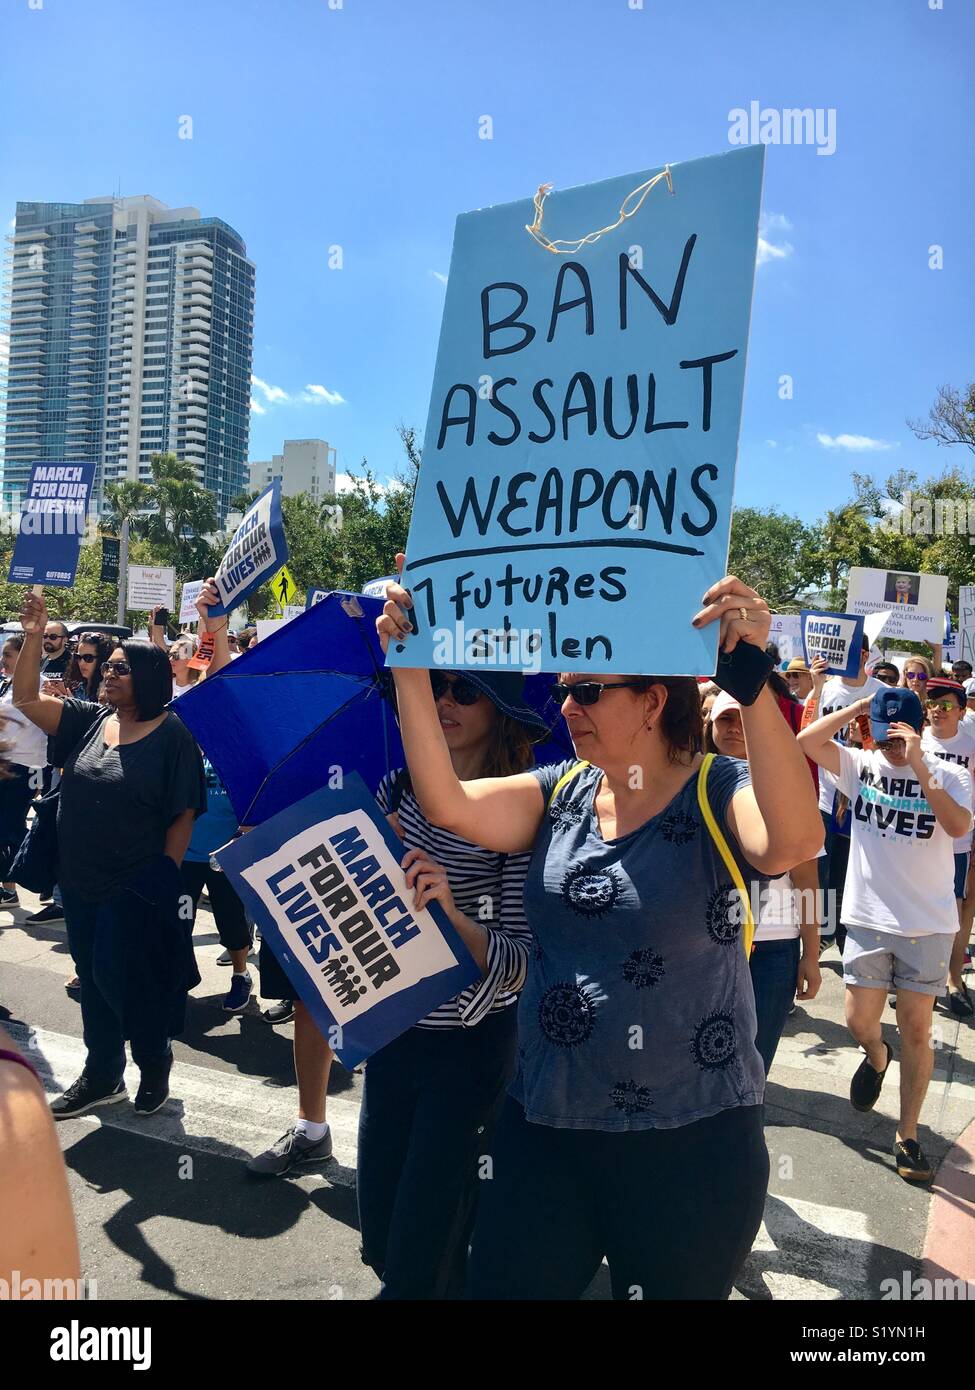 Miami Beach Florida “March For Our Lives.”  March 24, 2018 protest after Parkland, Florida school shootings. Stock Photo